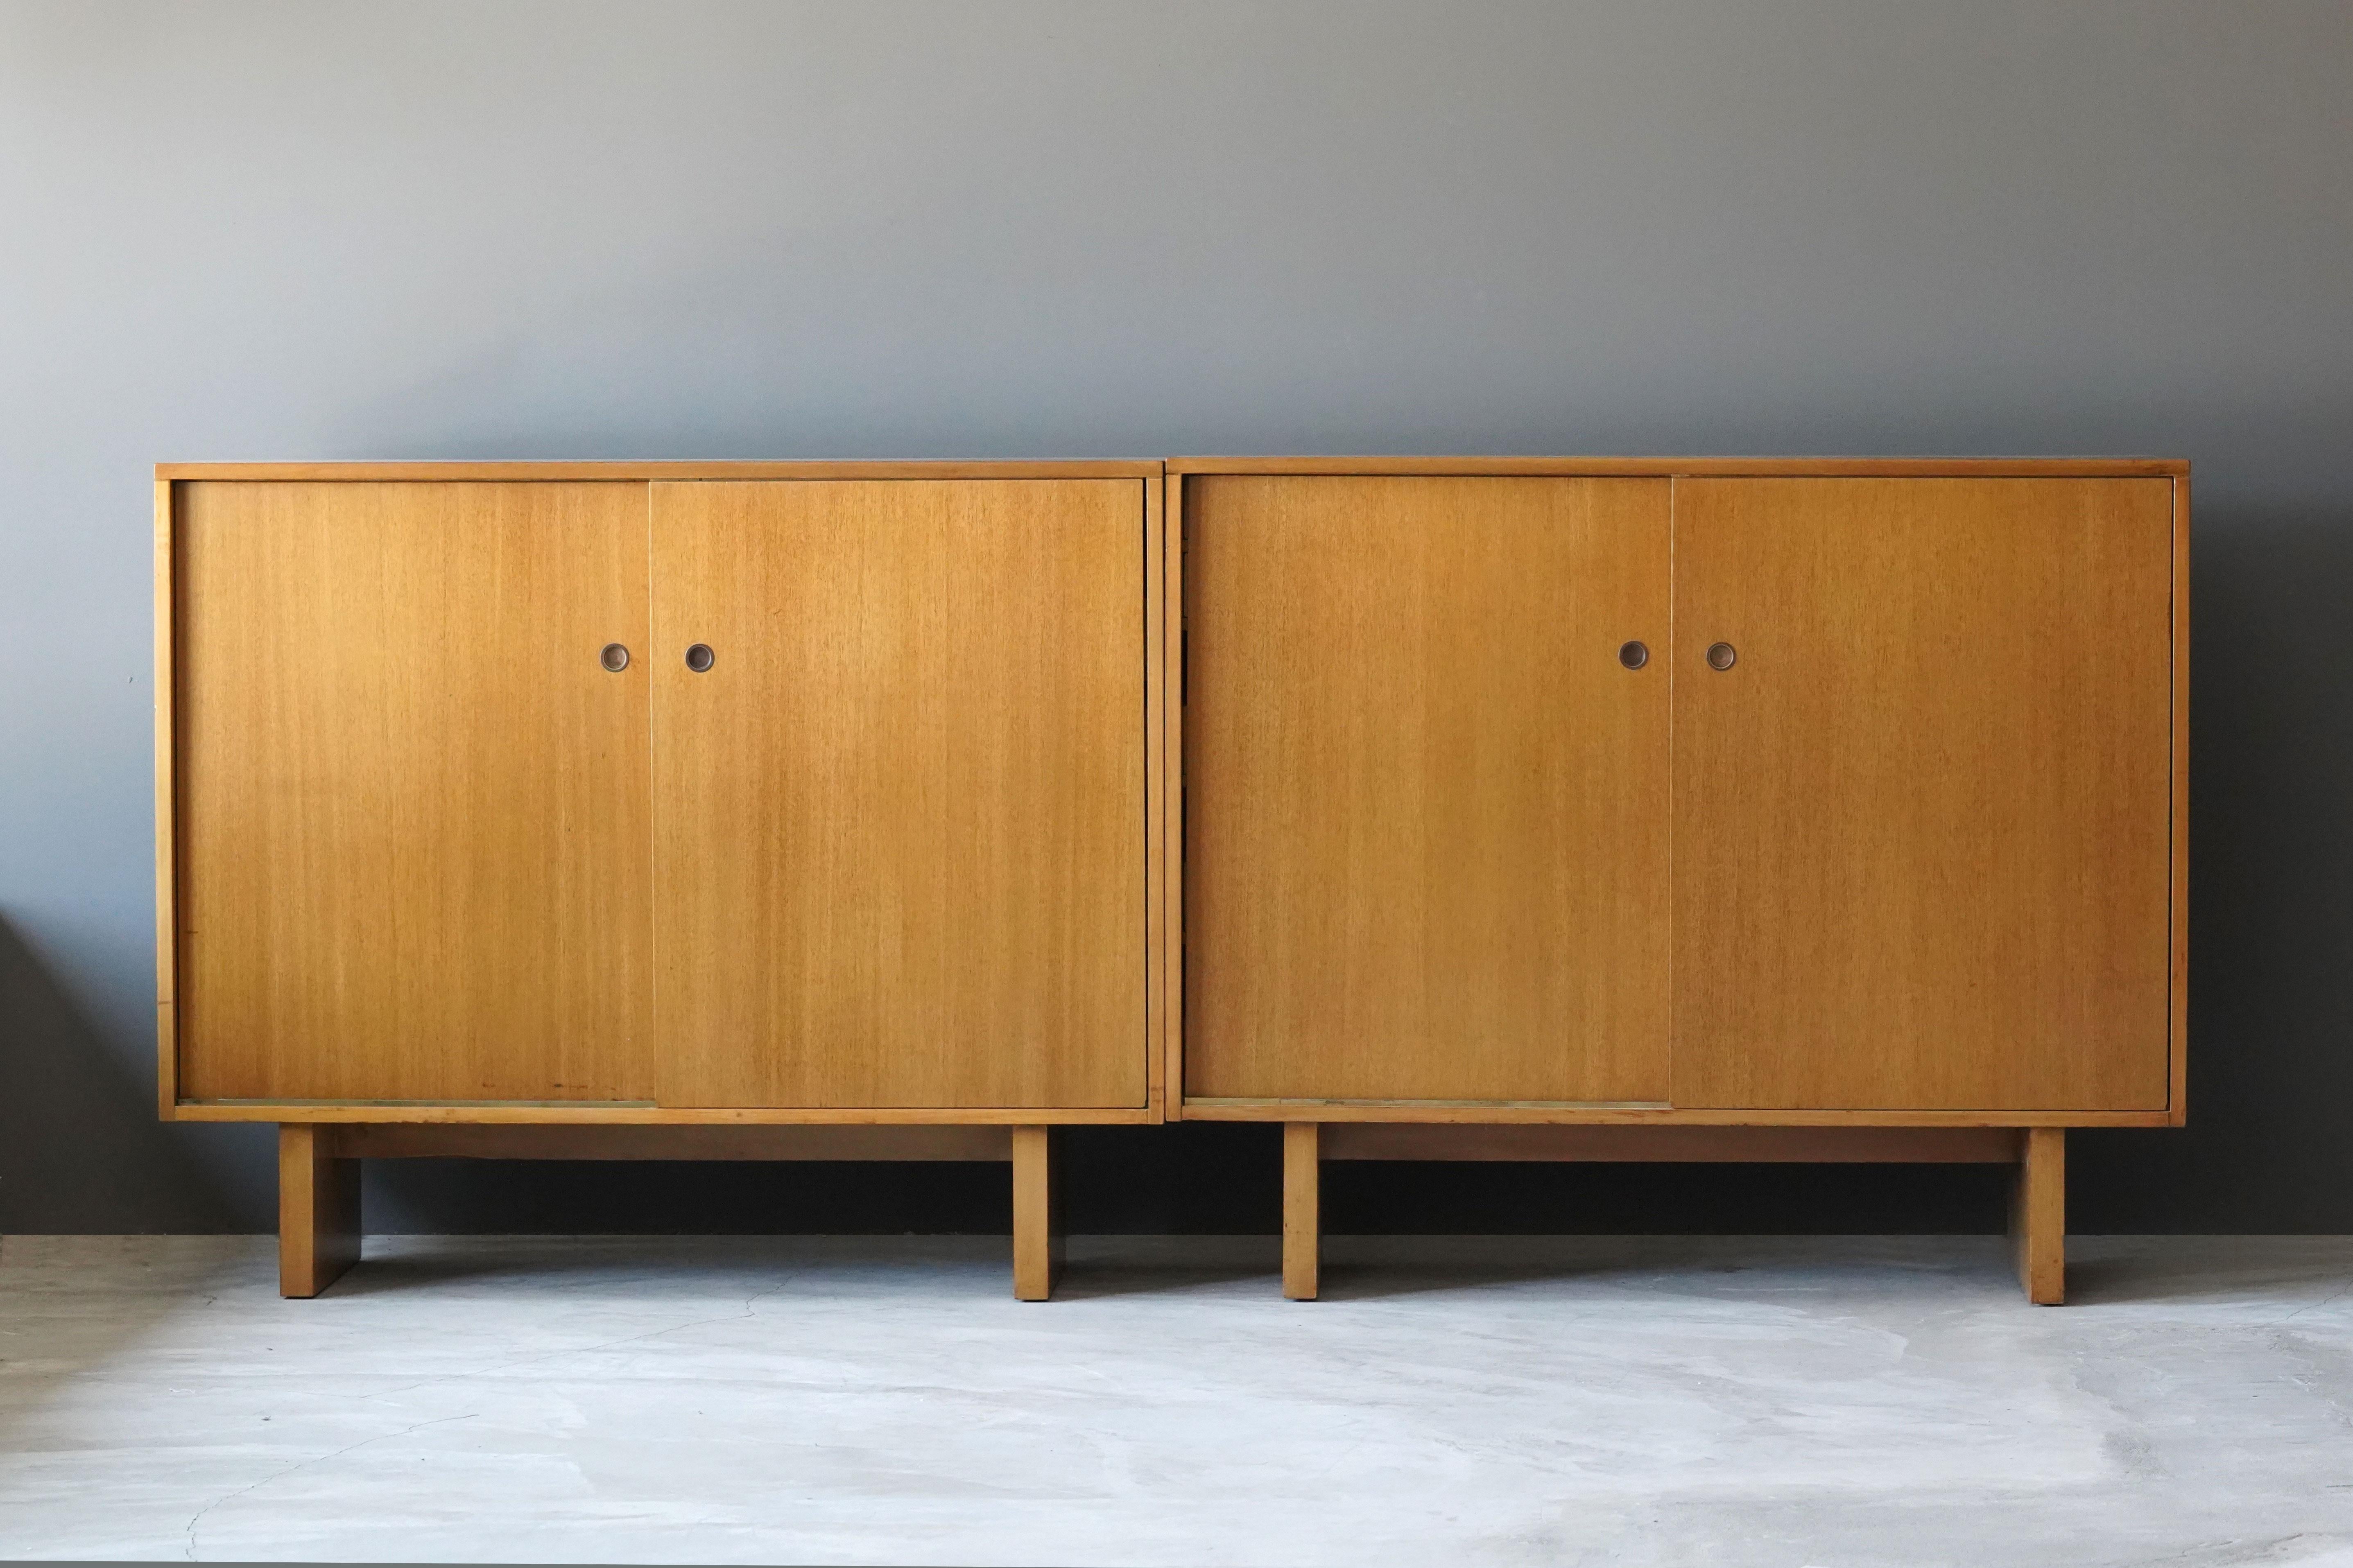 A pair of rare cabinets / sideboards / buffets / cupboards or credenzas. Designed by British / American designer T.H. Robsjohn-Gibbings. Produced by Widdicomb Furniture Company, Grand Rapids, Michigan. Labeled. Features intricate and highly